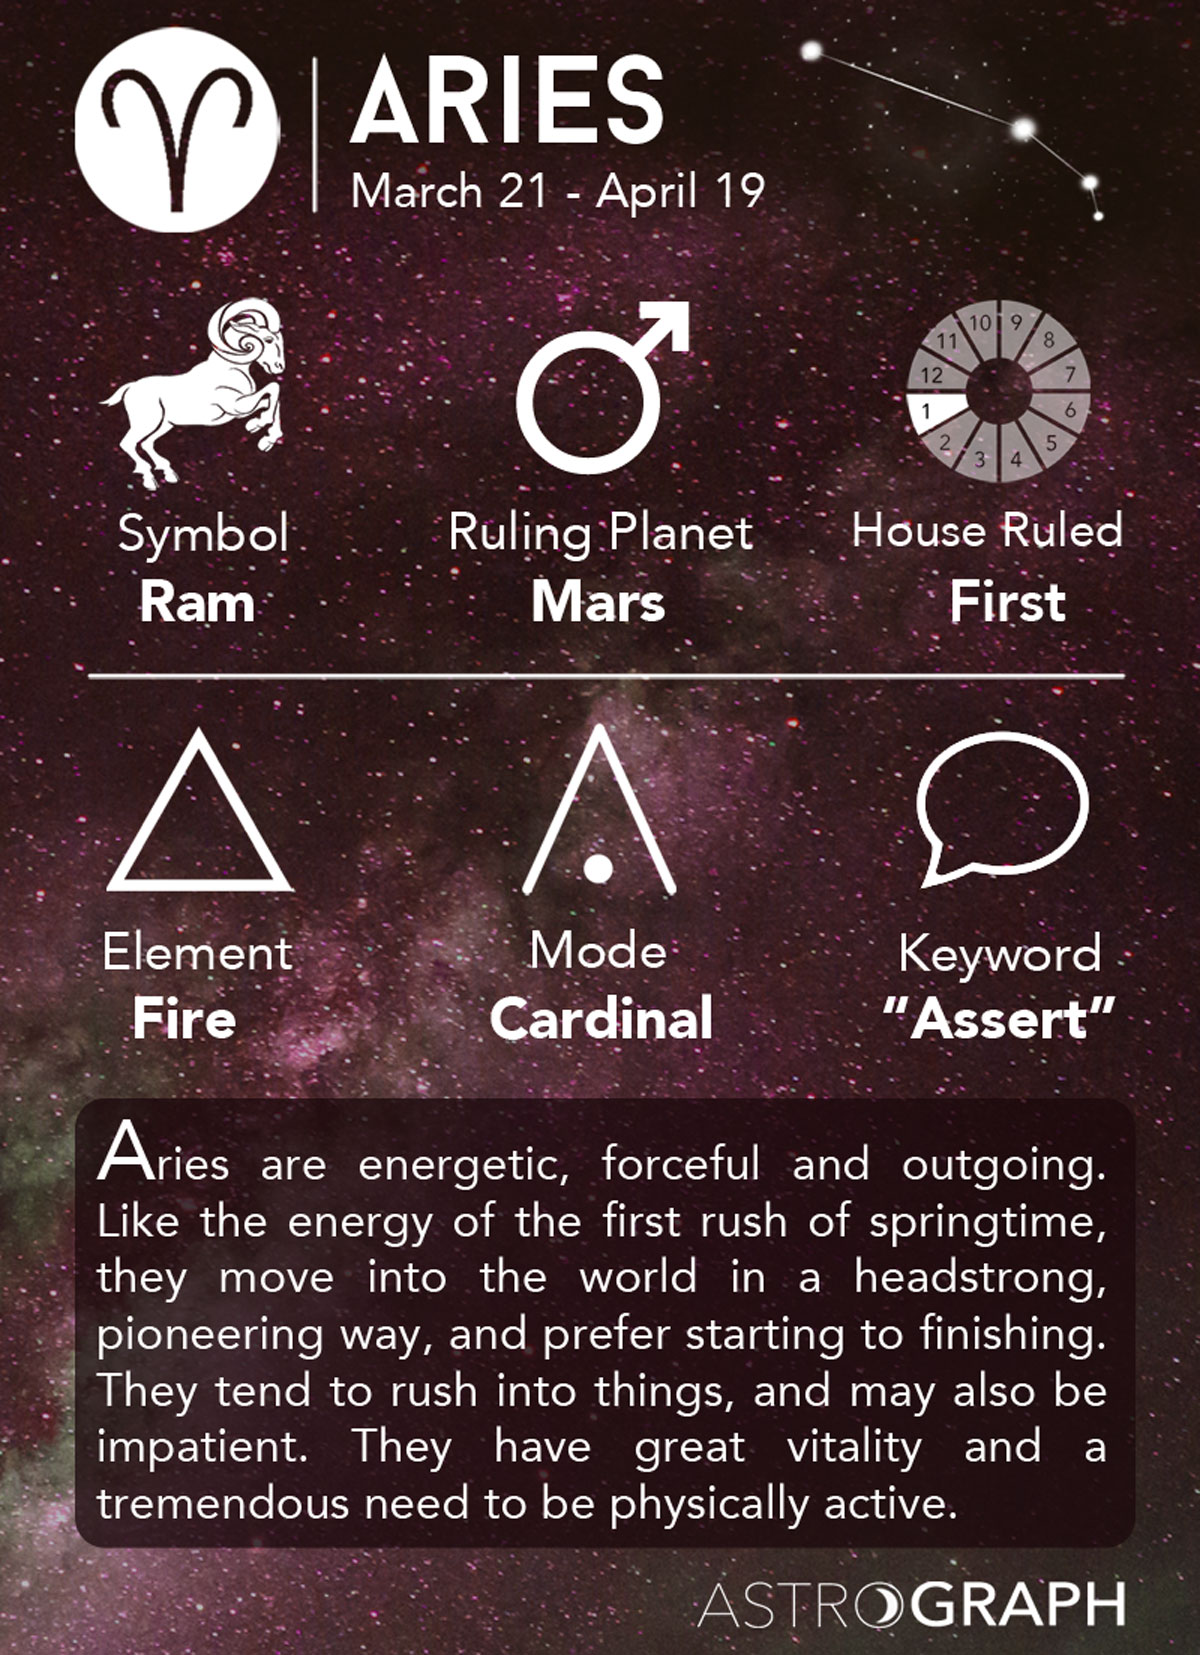 What is the element of Aries?